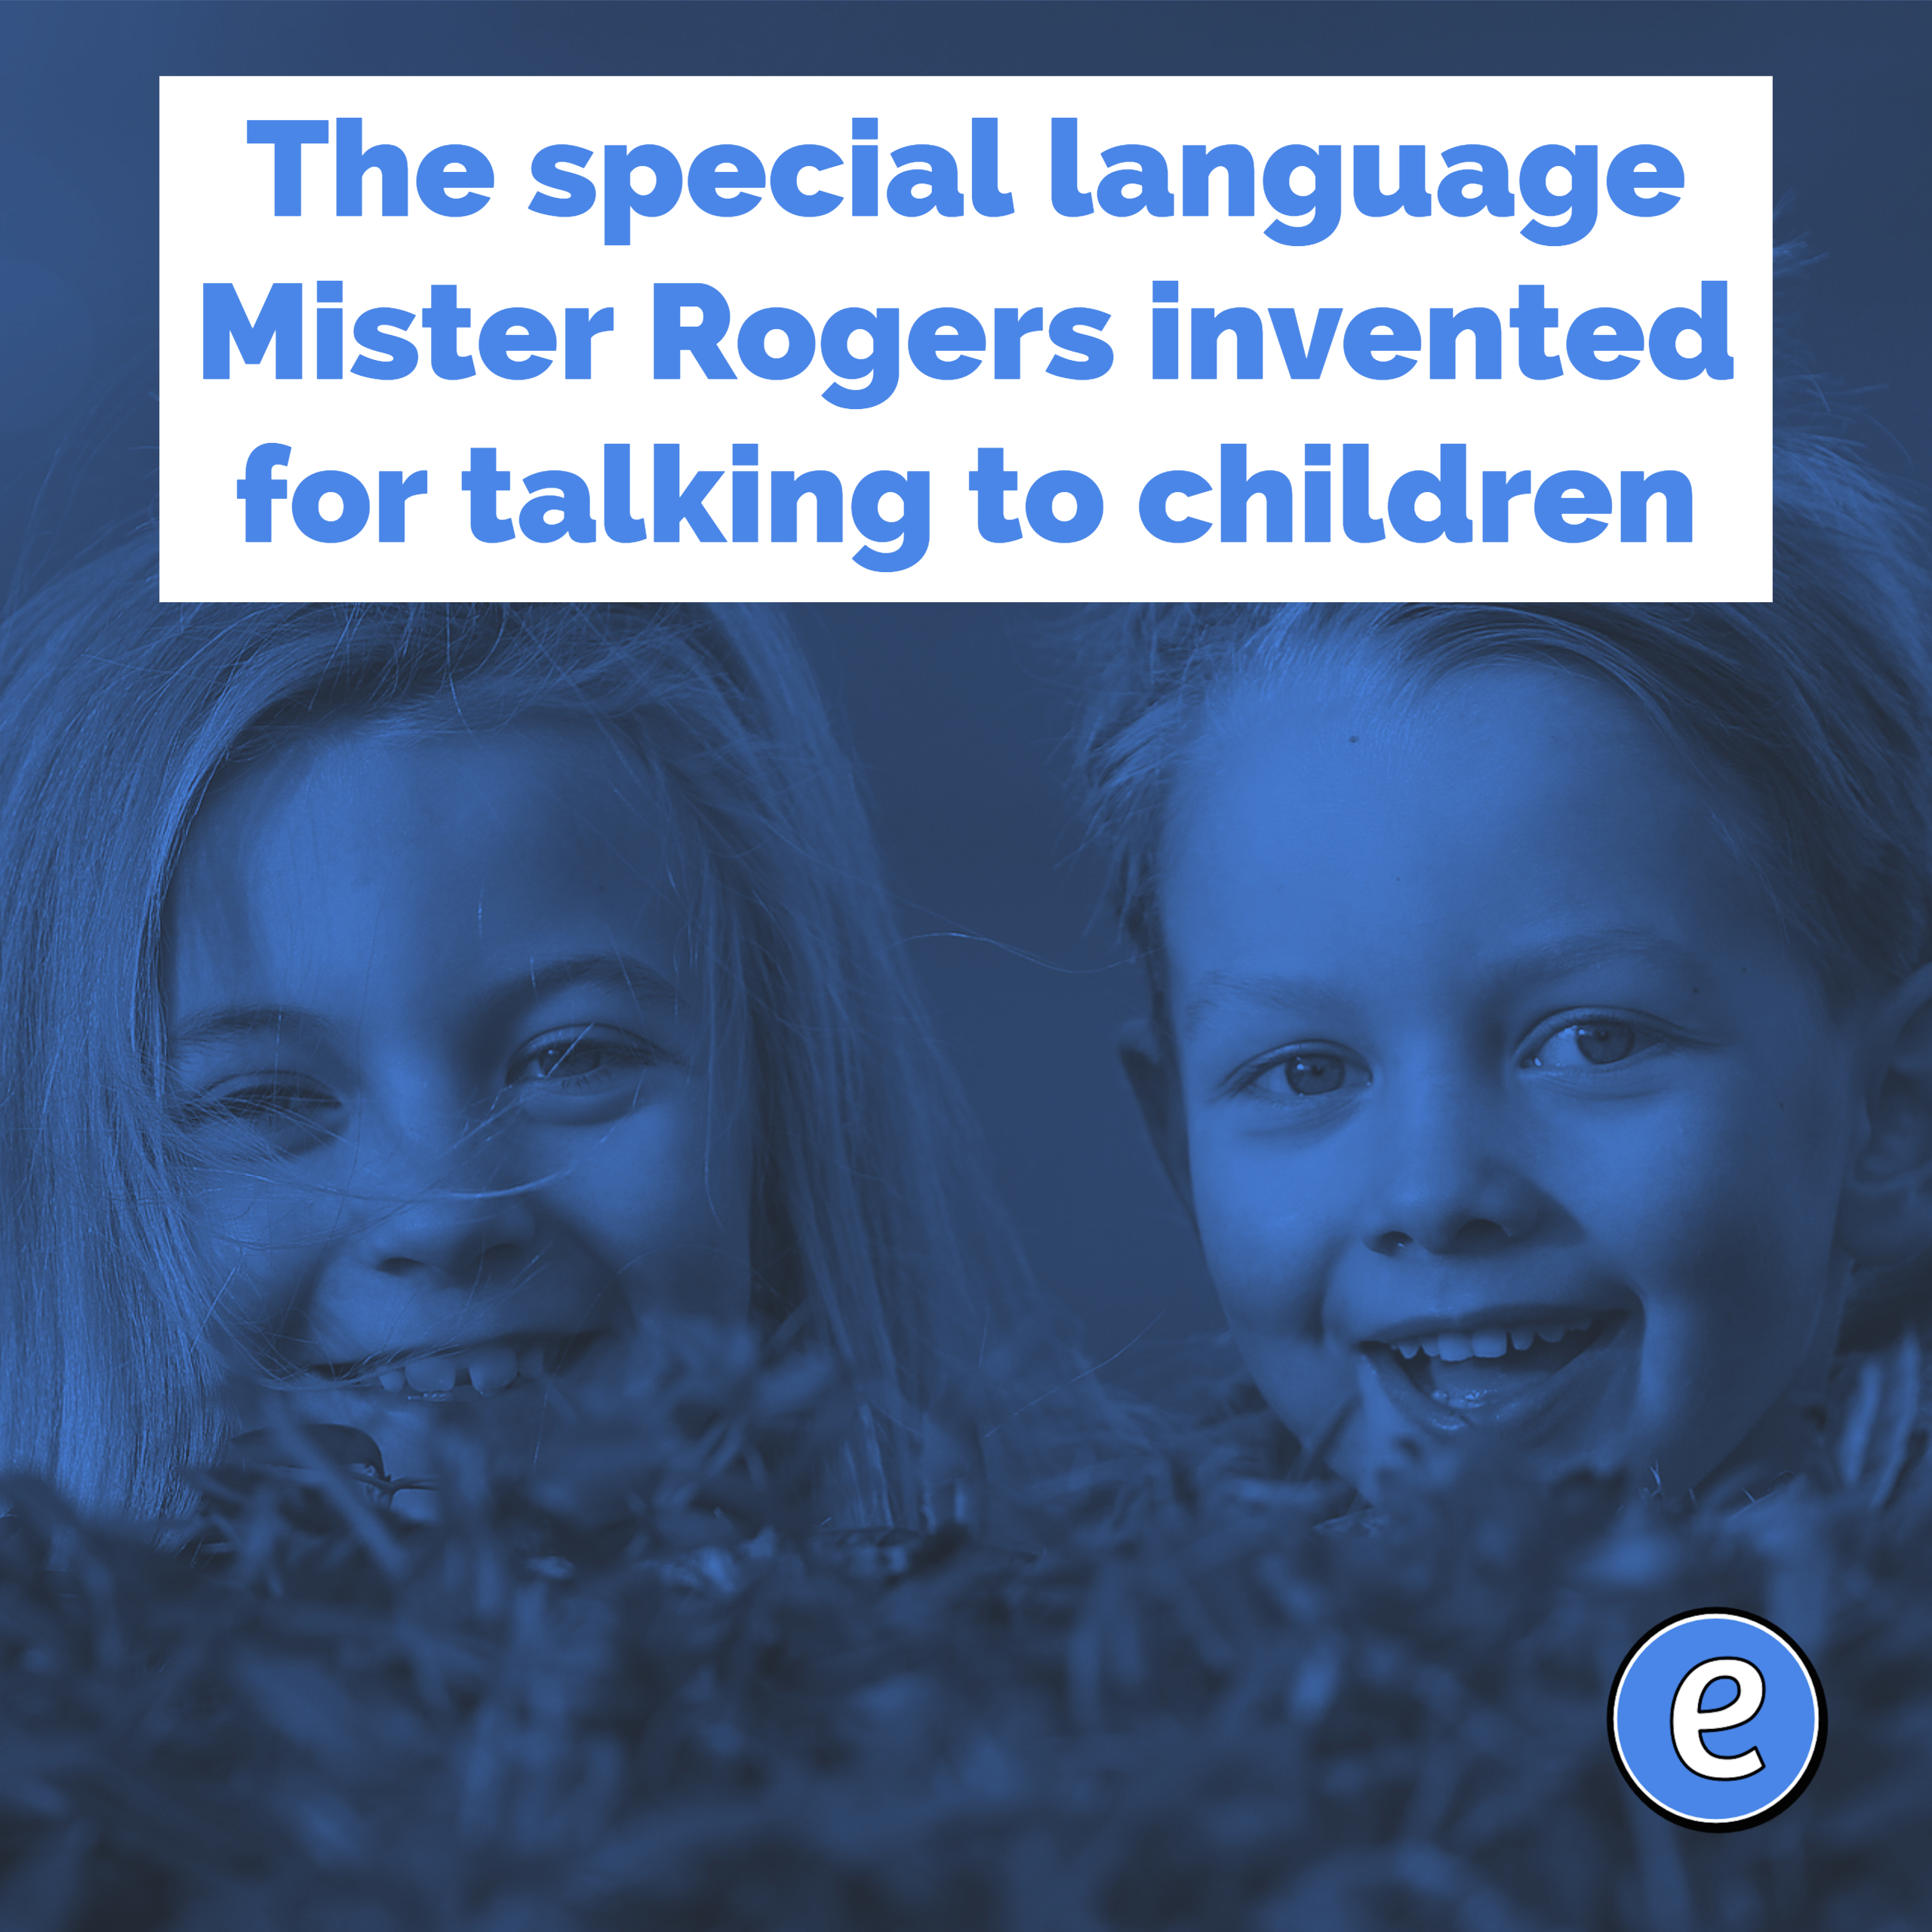 The special language Mister Rogers invented for talking to children